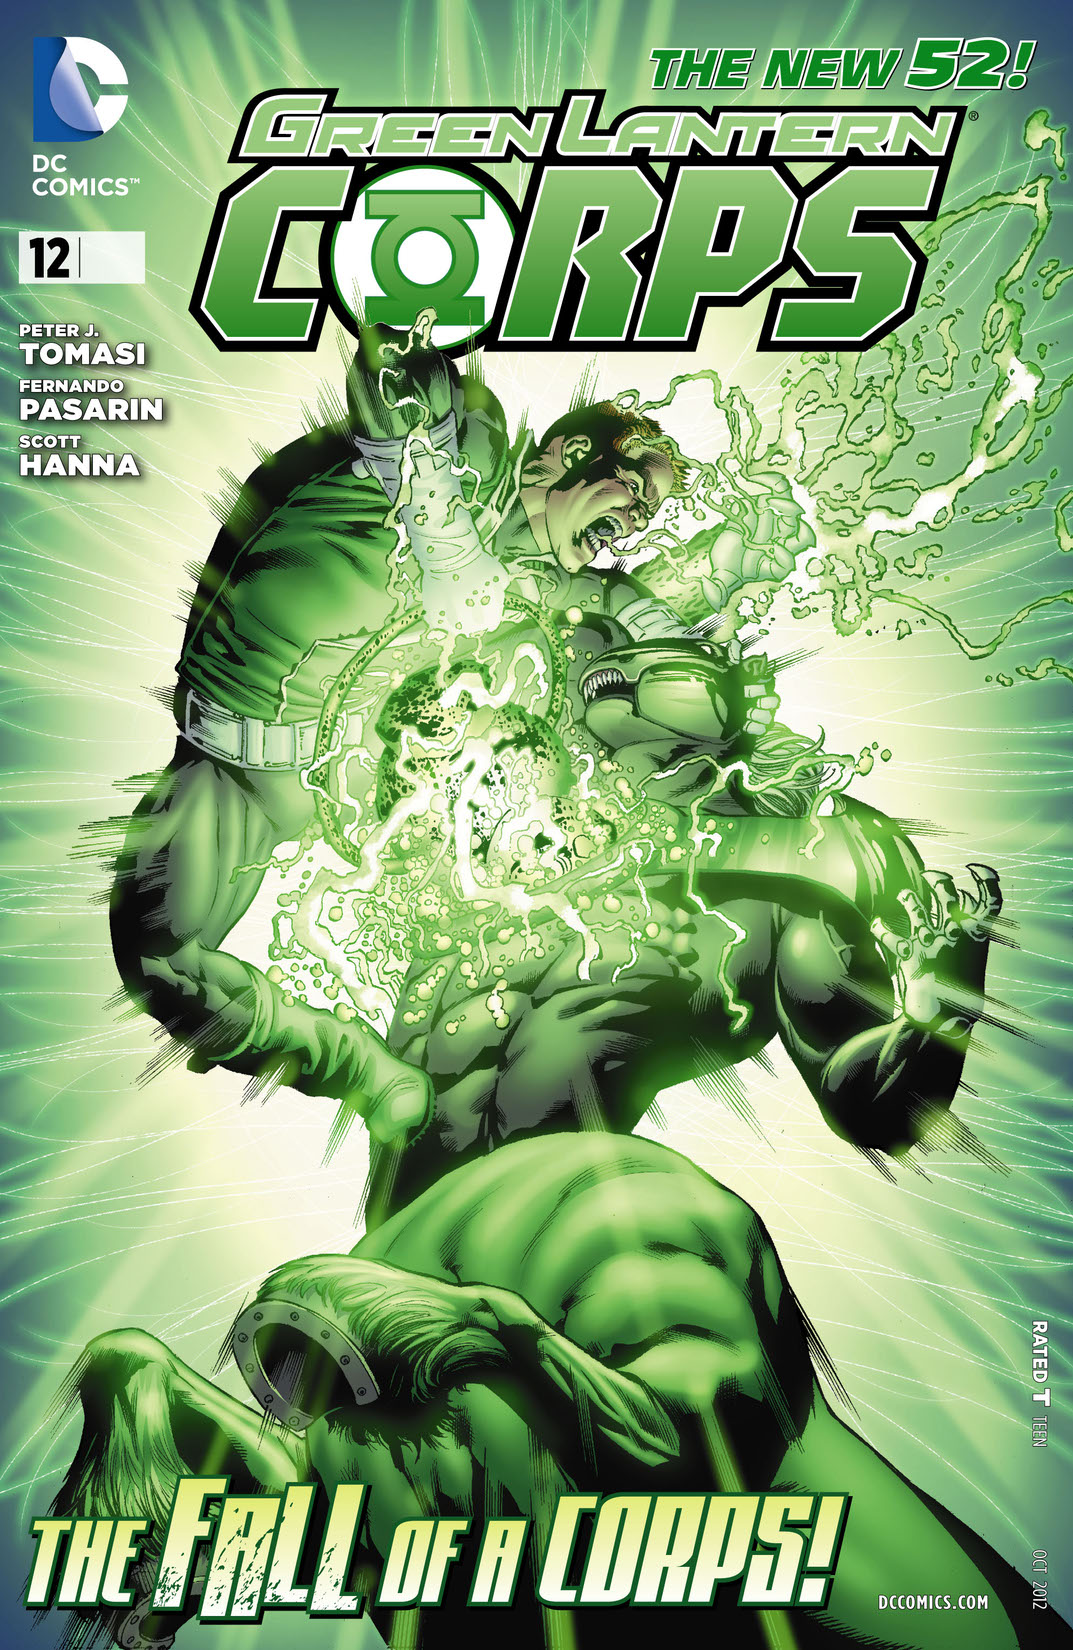 Green Lantern Corps (2011-) #12 preview images